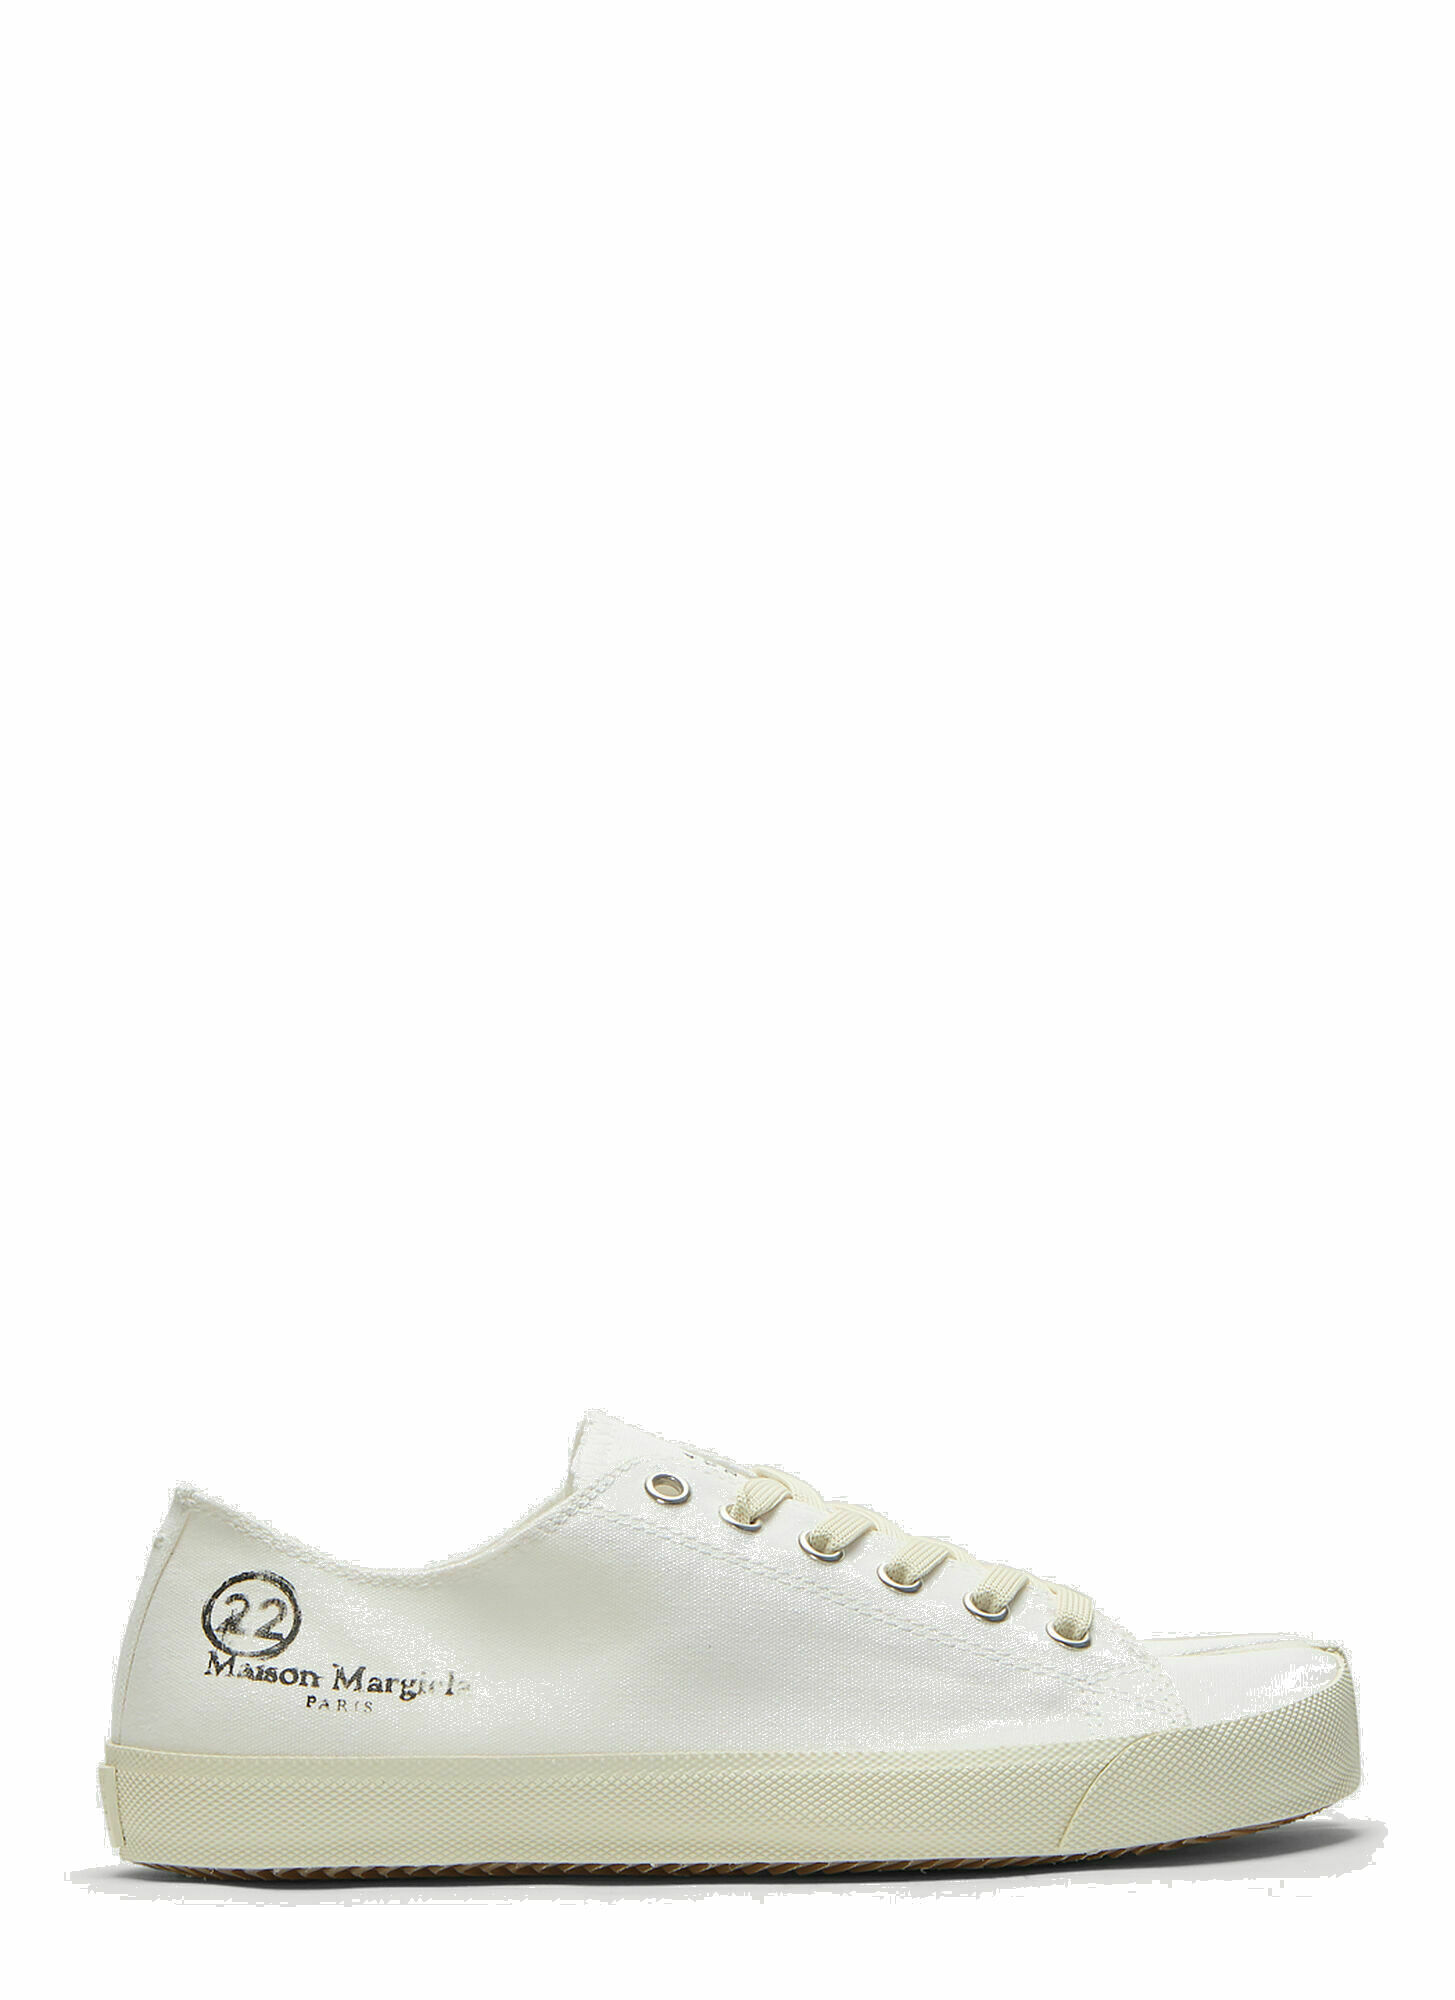 Tabi Low-Top Canvas Sneakers in White Maison Margiela